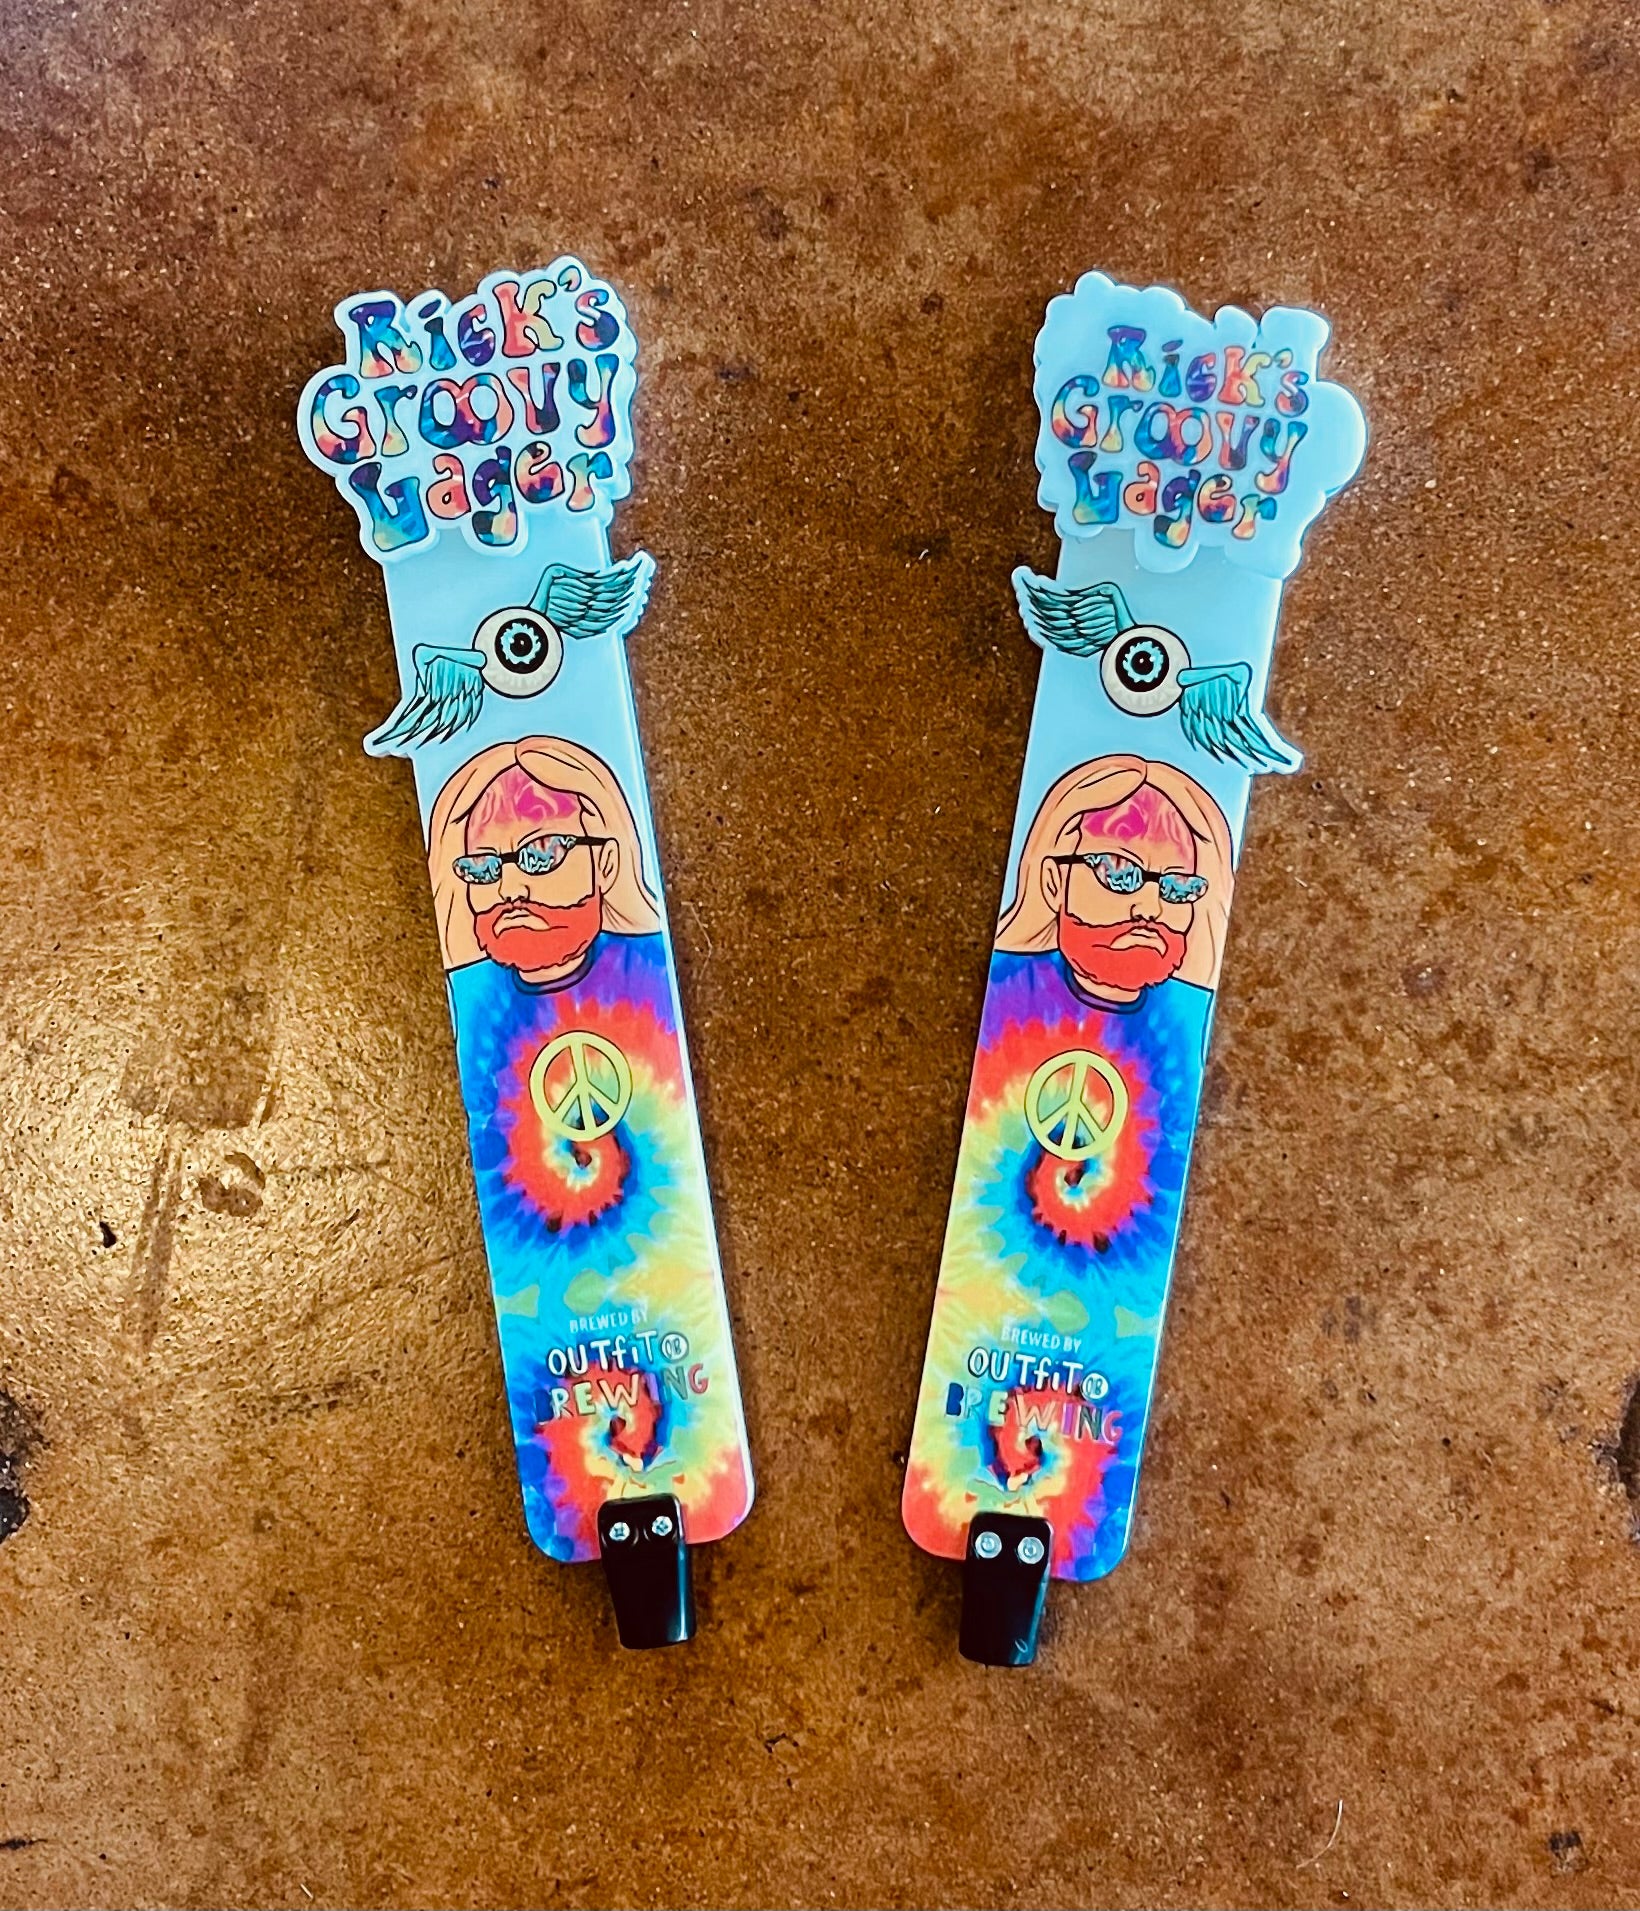 Strokers Icehouse "Rick's Groovy Lager" Tap Handle